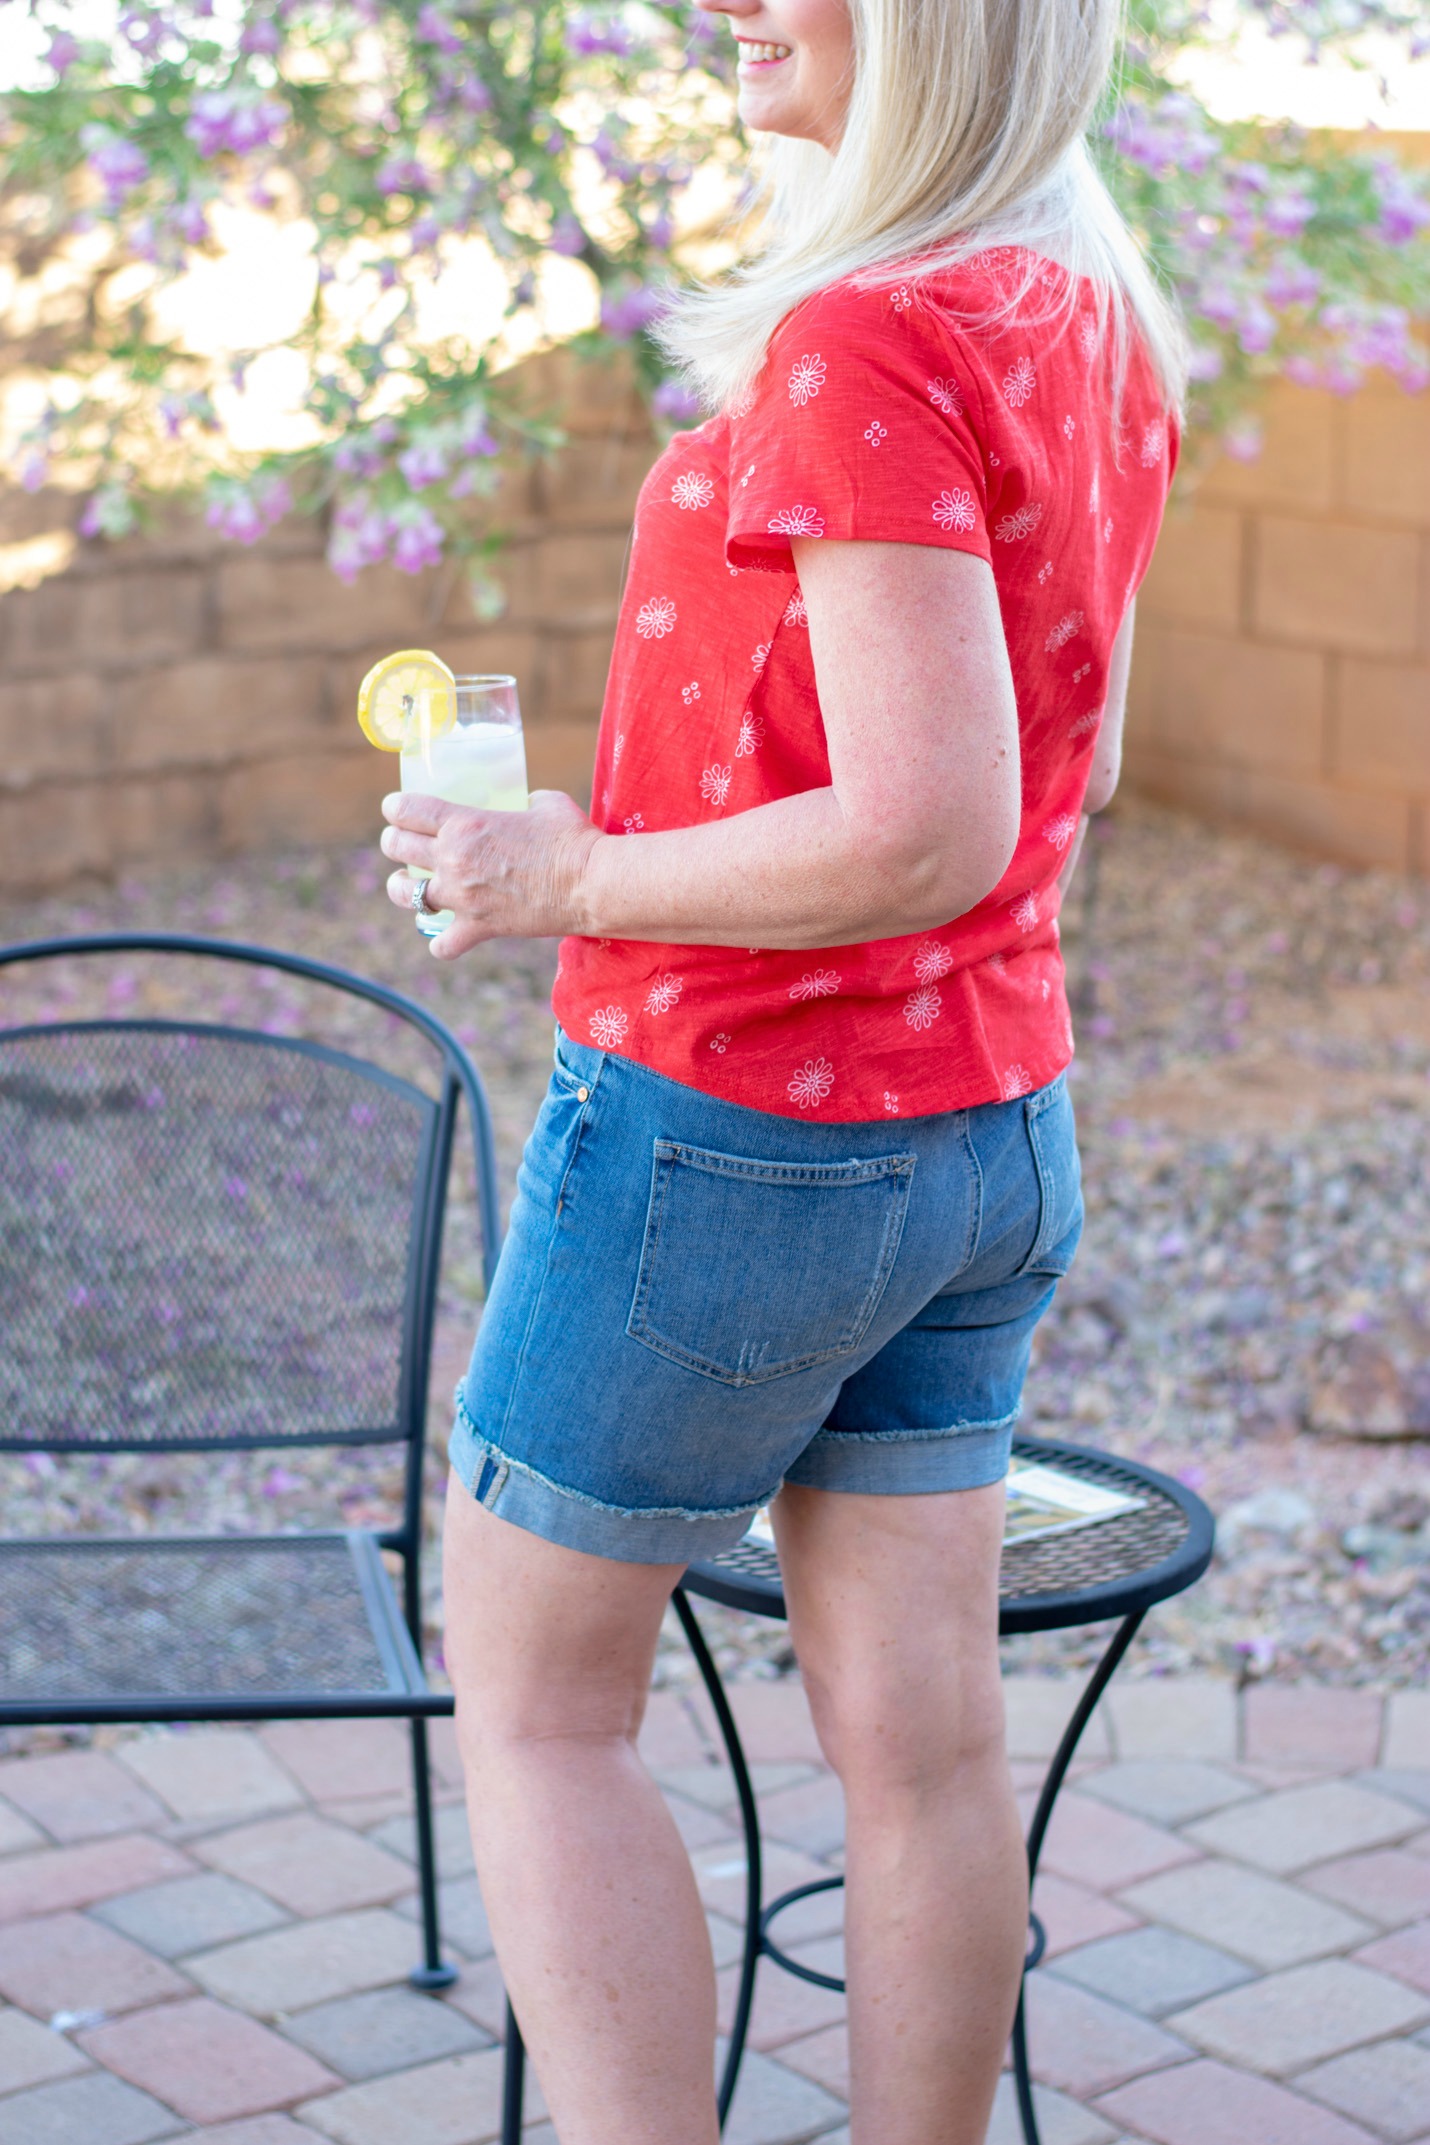 Denim shorts and a simple red print t-shirt for a simple summer day